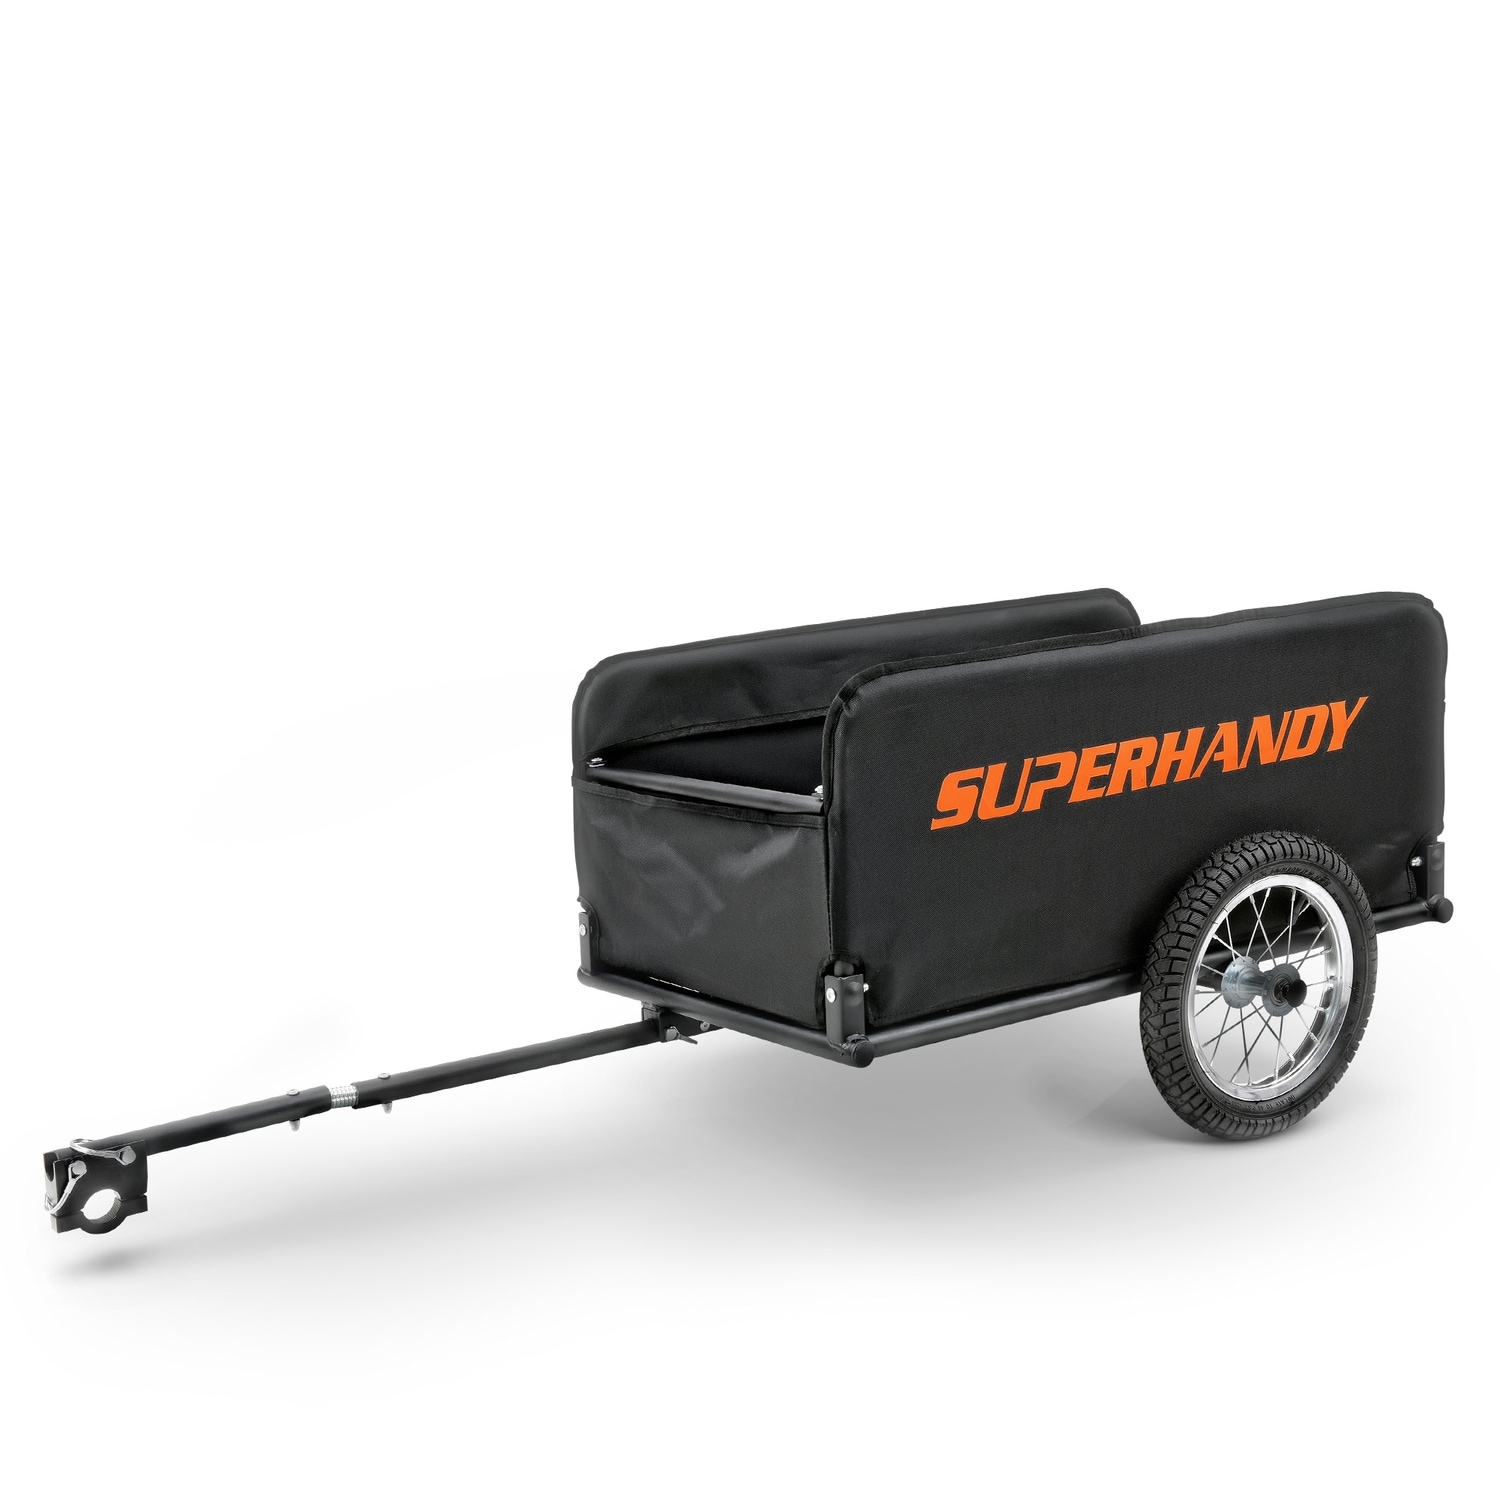 SuperHandy Rechargeable Lithium-Ion 48V 2Ah Battery - for Mobility Scooter, Utility Wagon, & Wheelbarrow